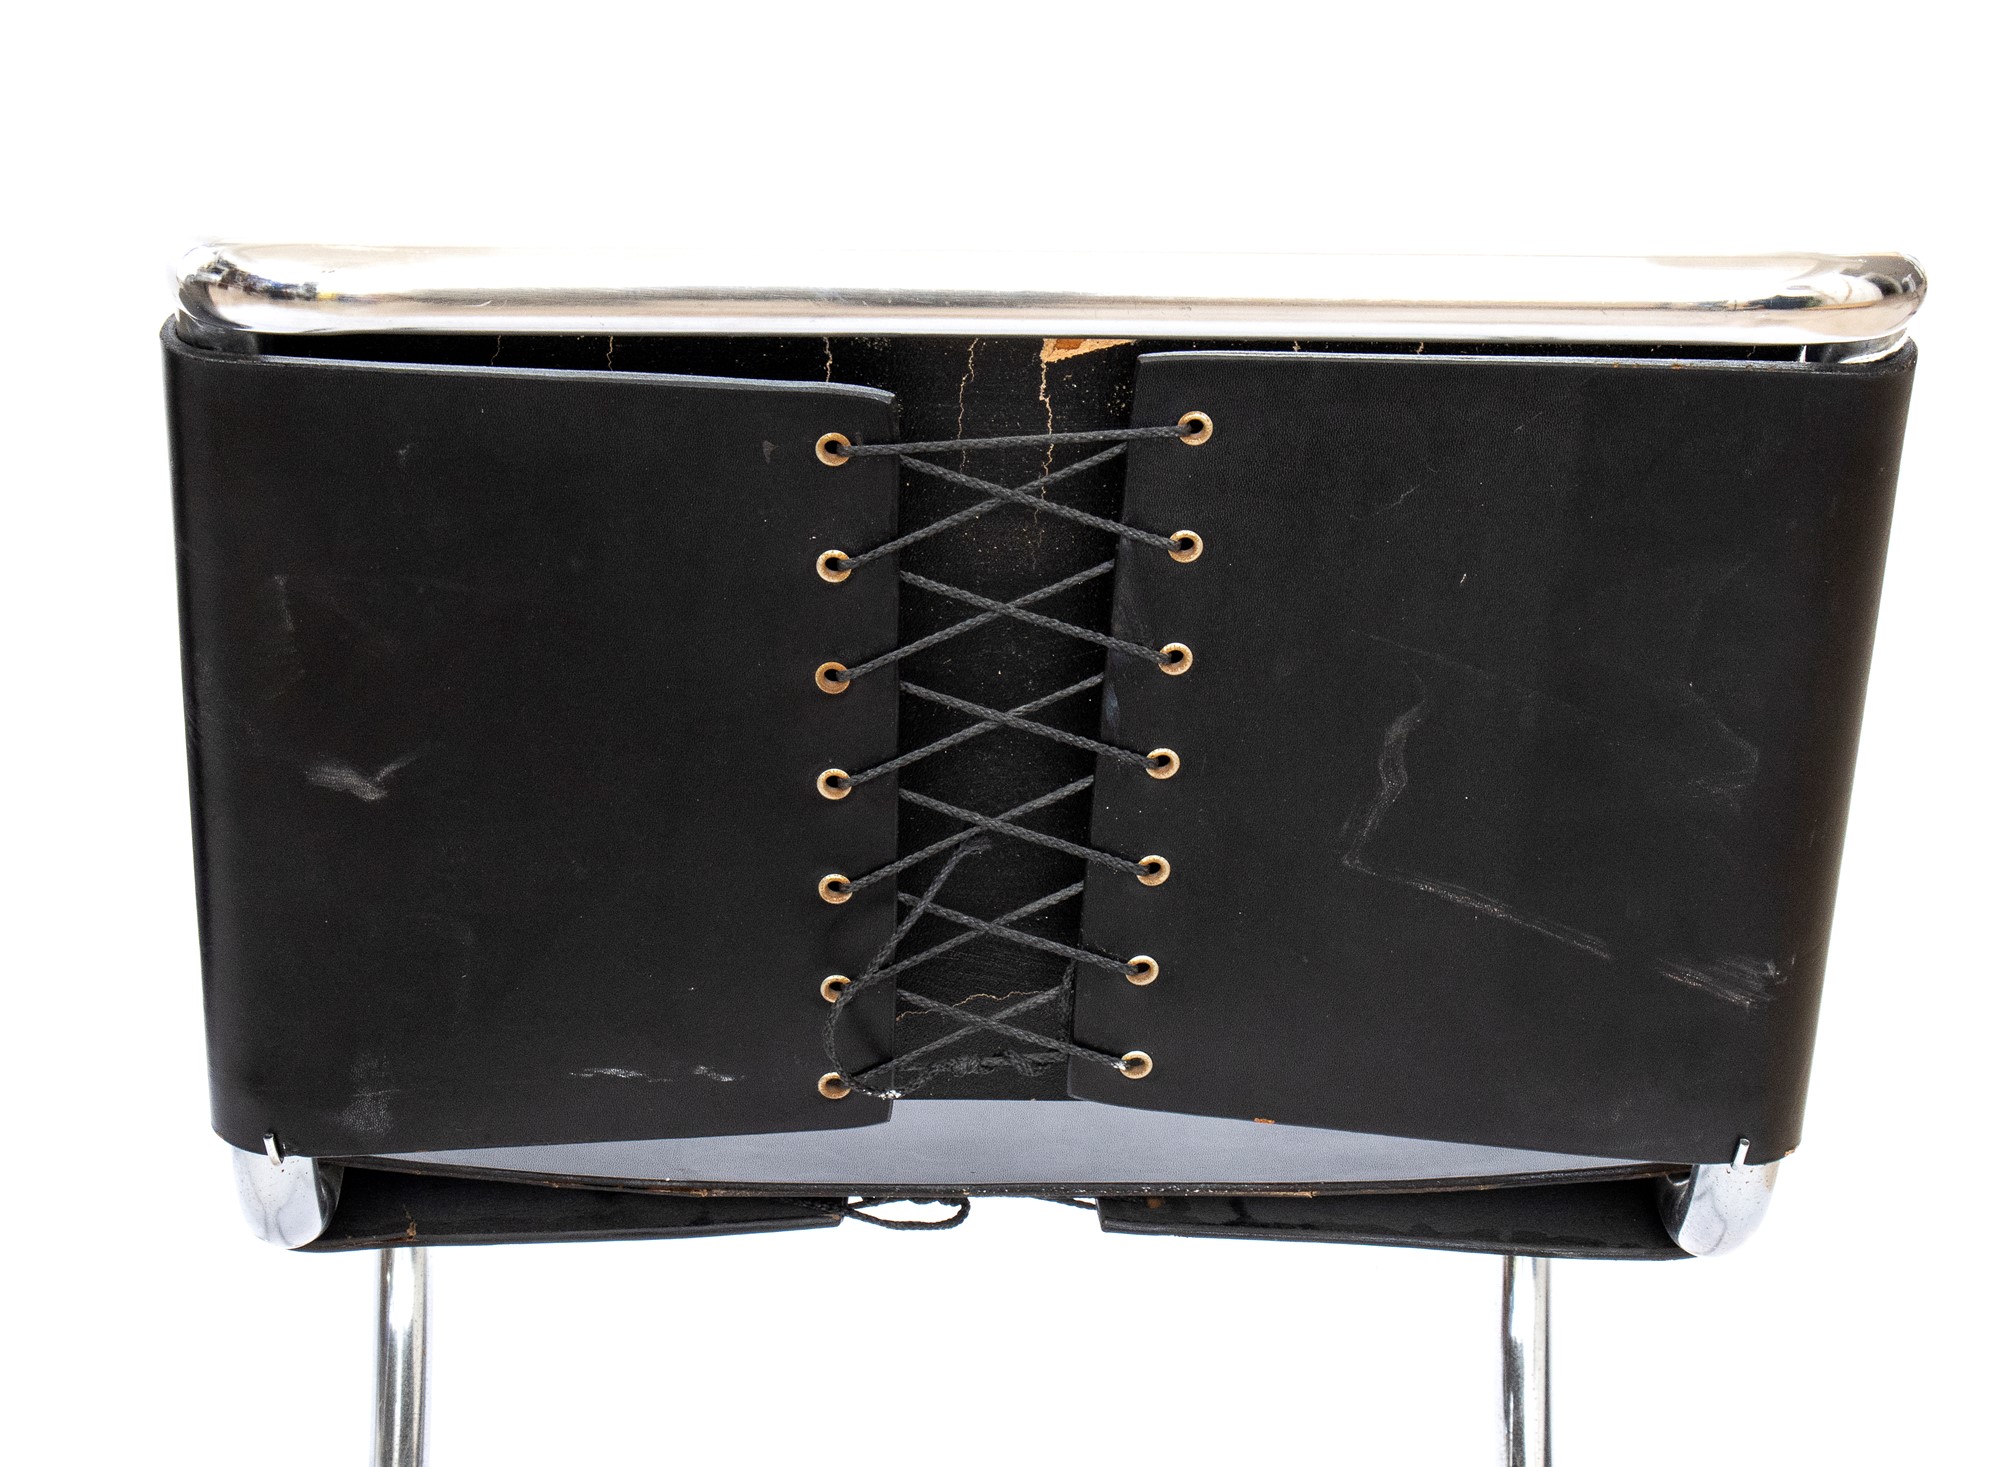 2 chairs in black leather and steel designed by Mart Stam and Marcer Beuer - Image 19 of 19